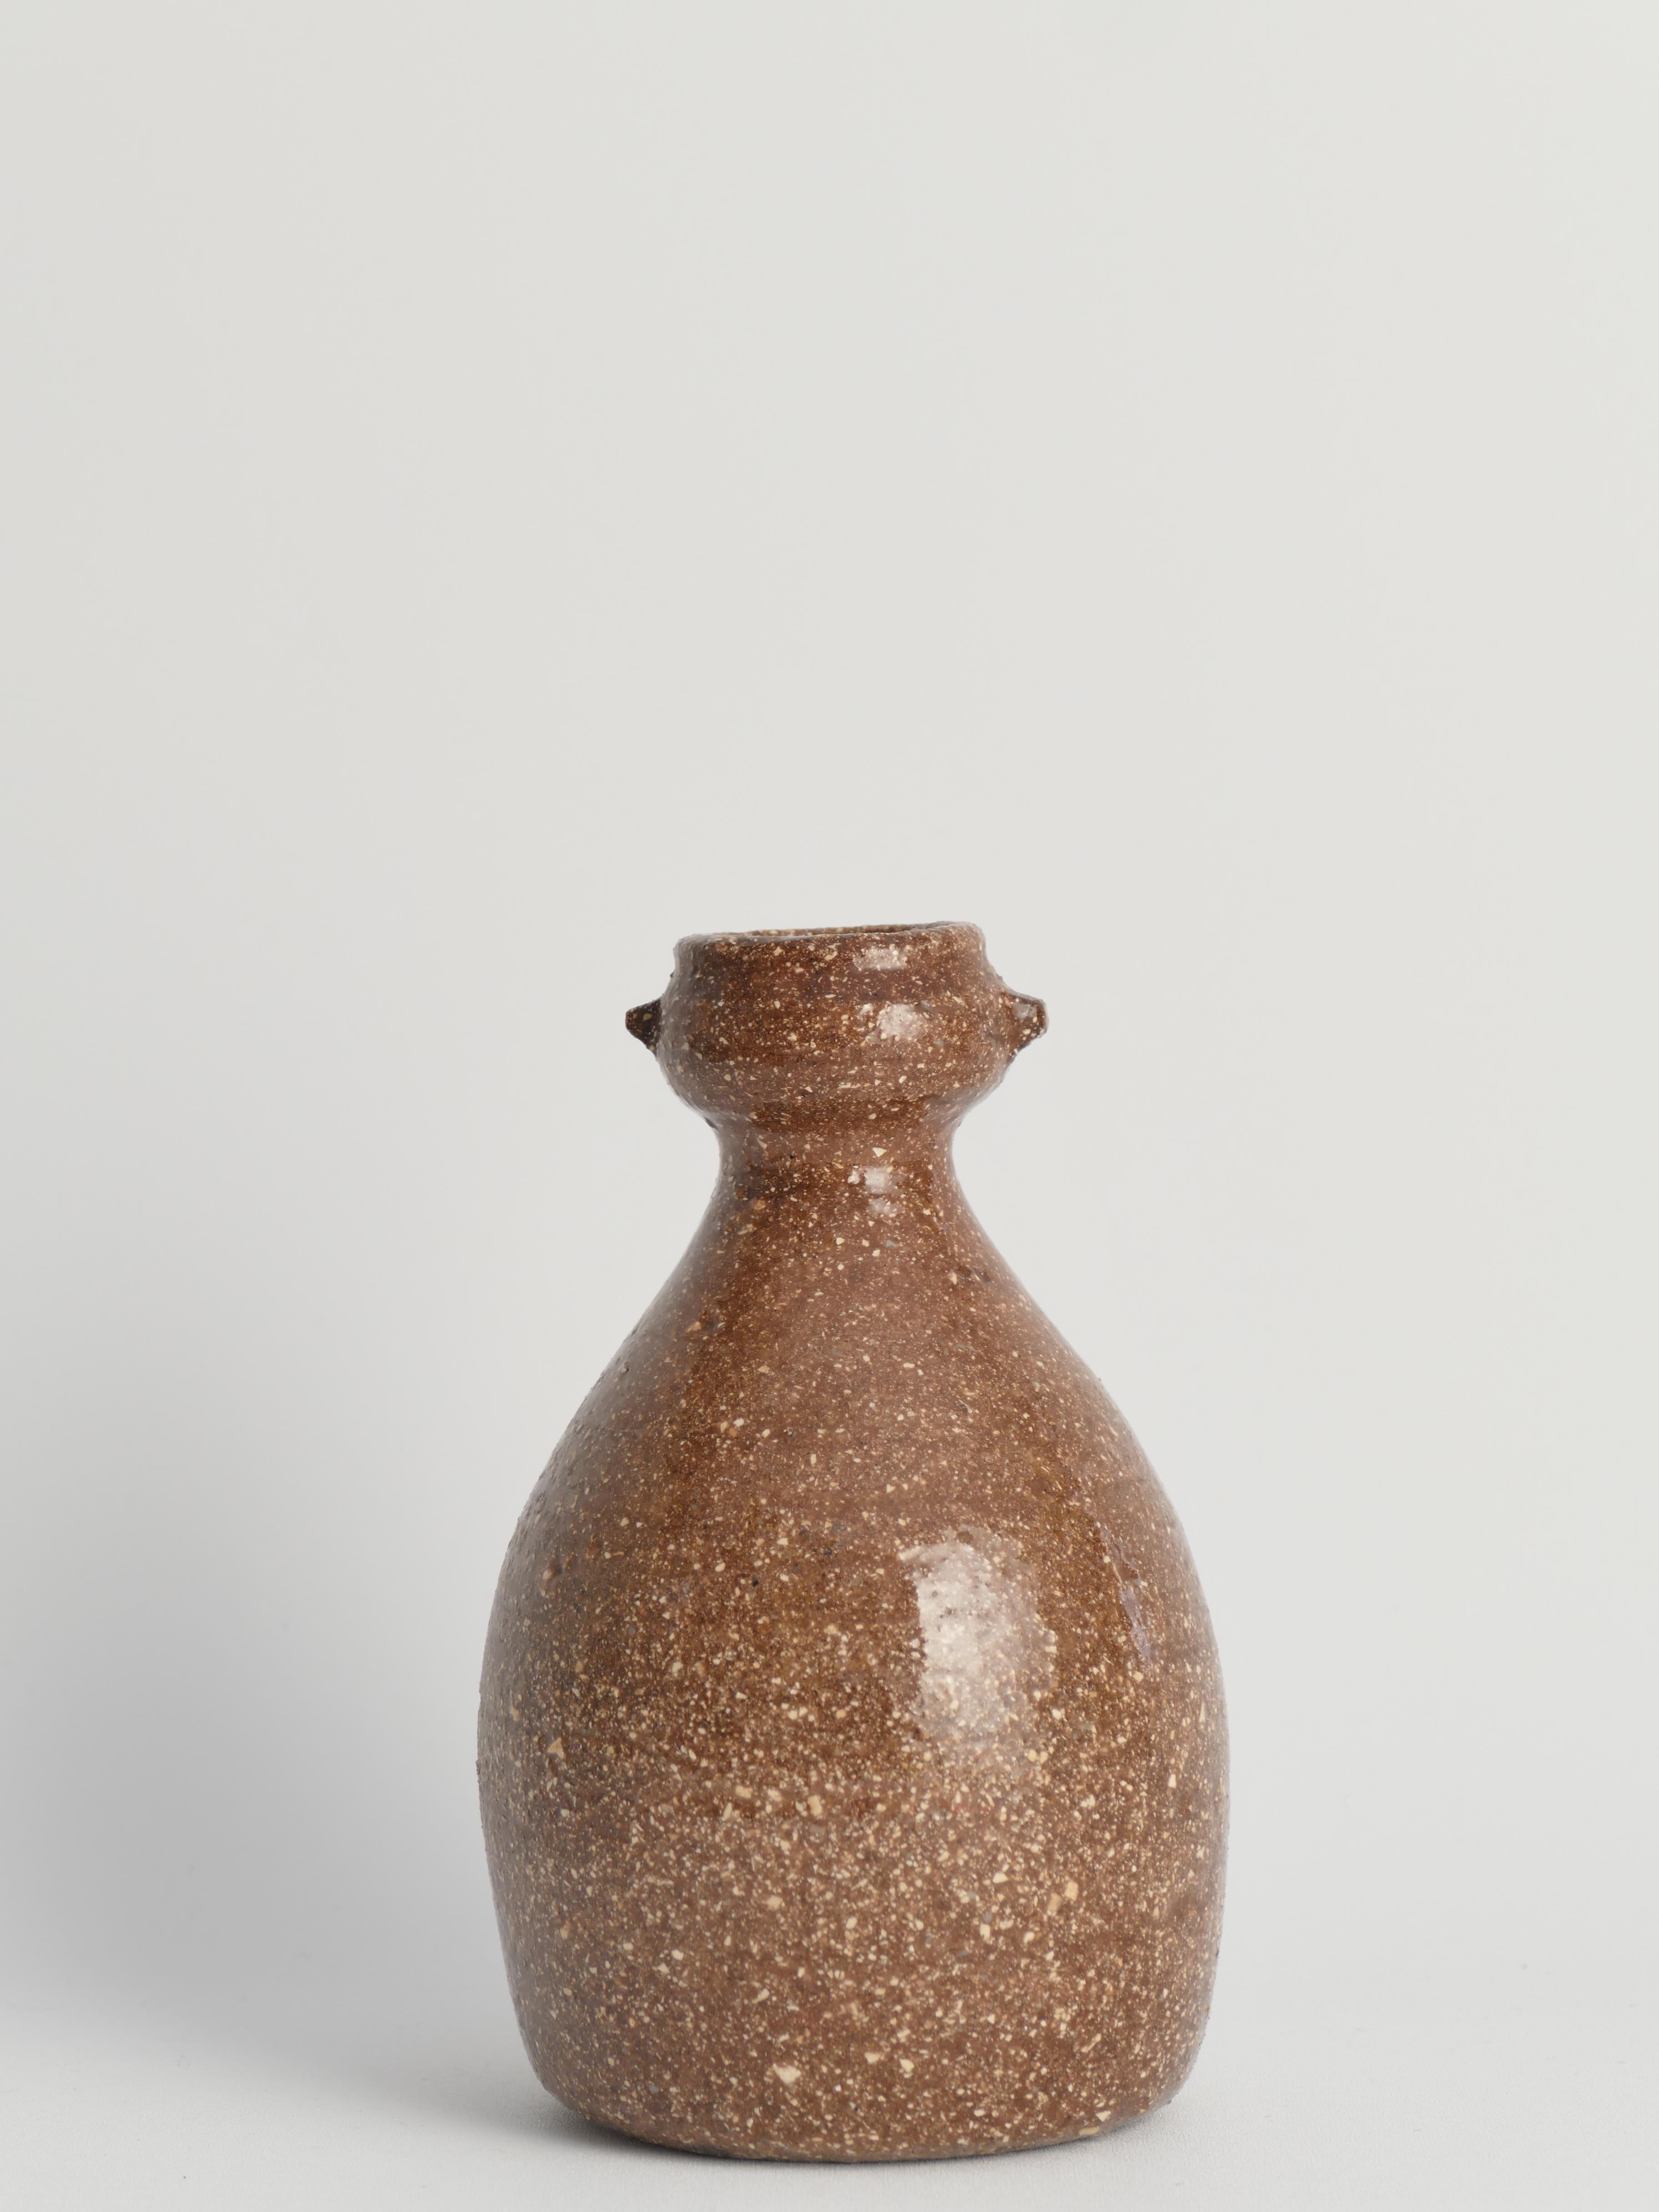 This exquisite handmade stoneware vase is reminiscent of the famed Japanese Shigaraki pottery tradition, renowned for its use of local sandy clay from the bed of Lake Biwa, imparting a warm orange hue and exceptional durability to the